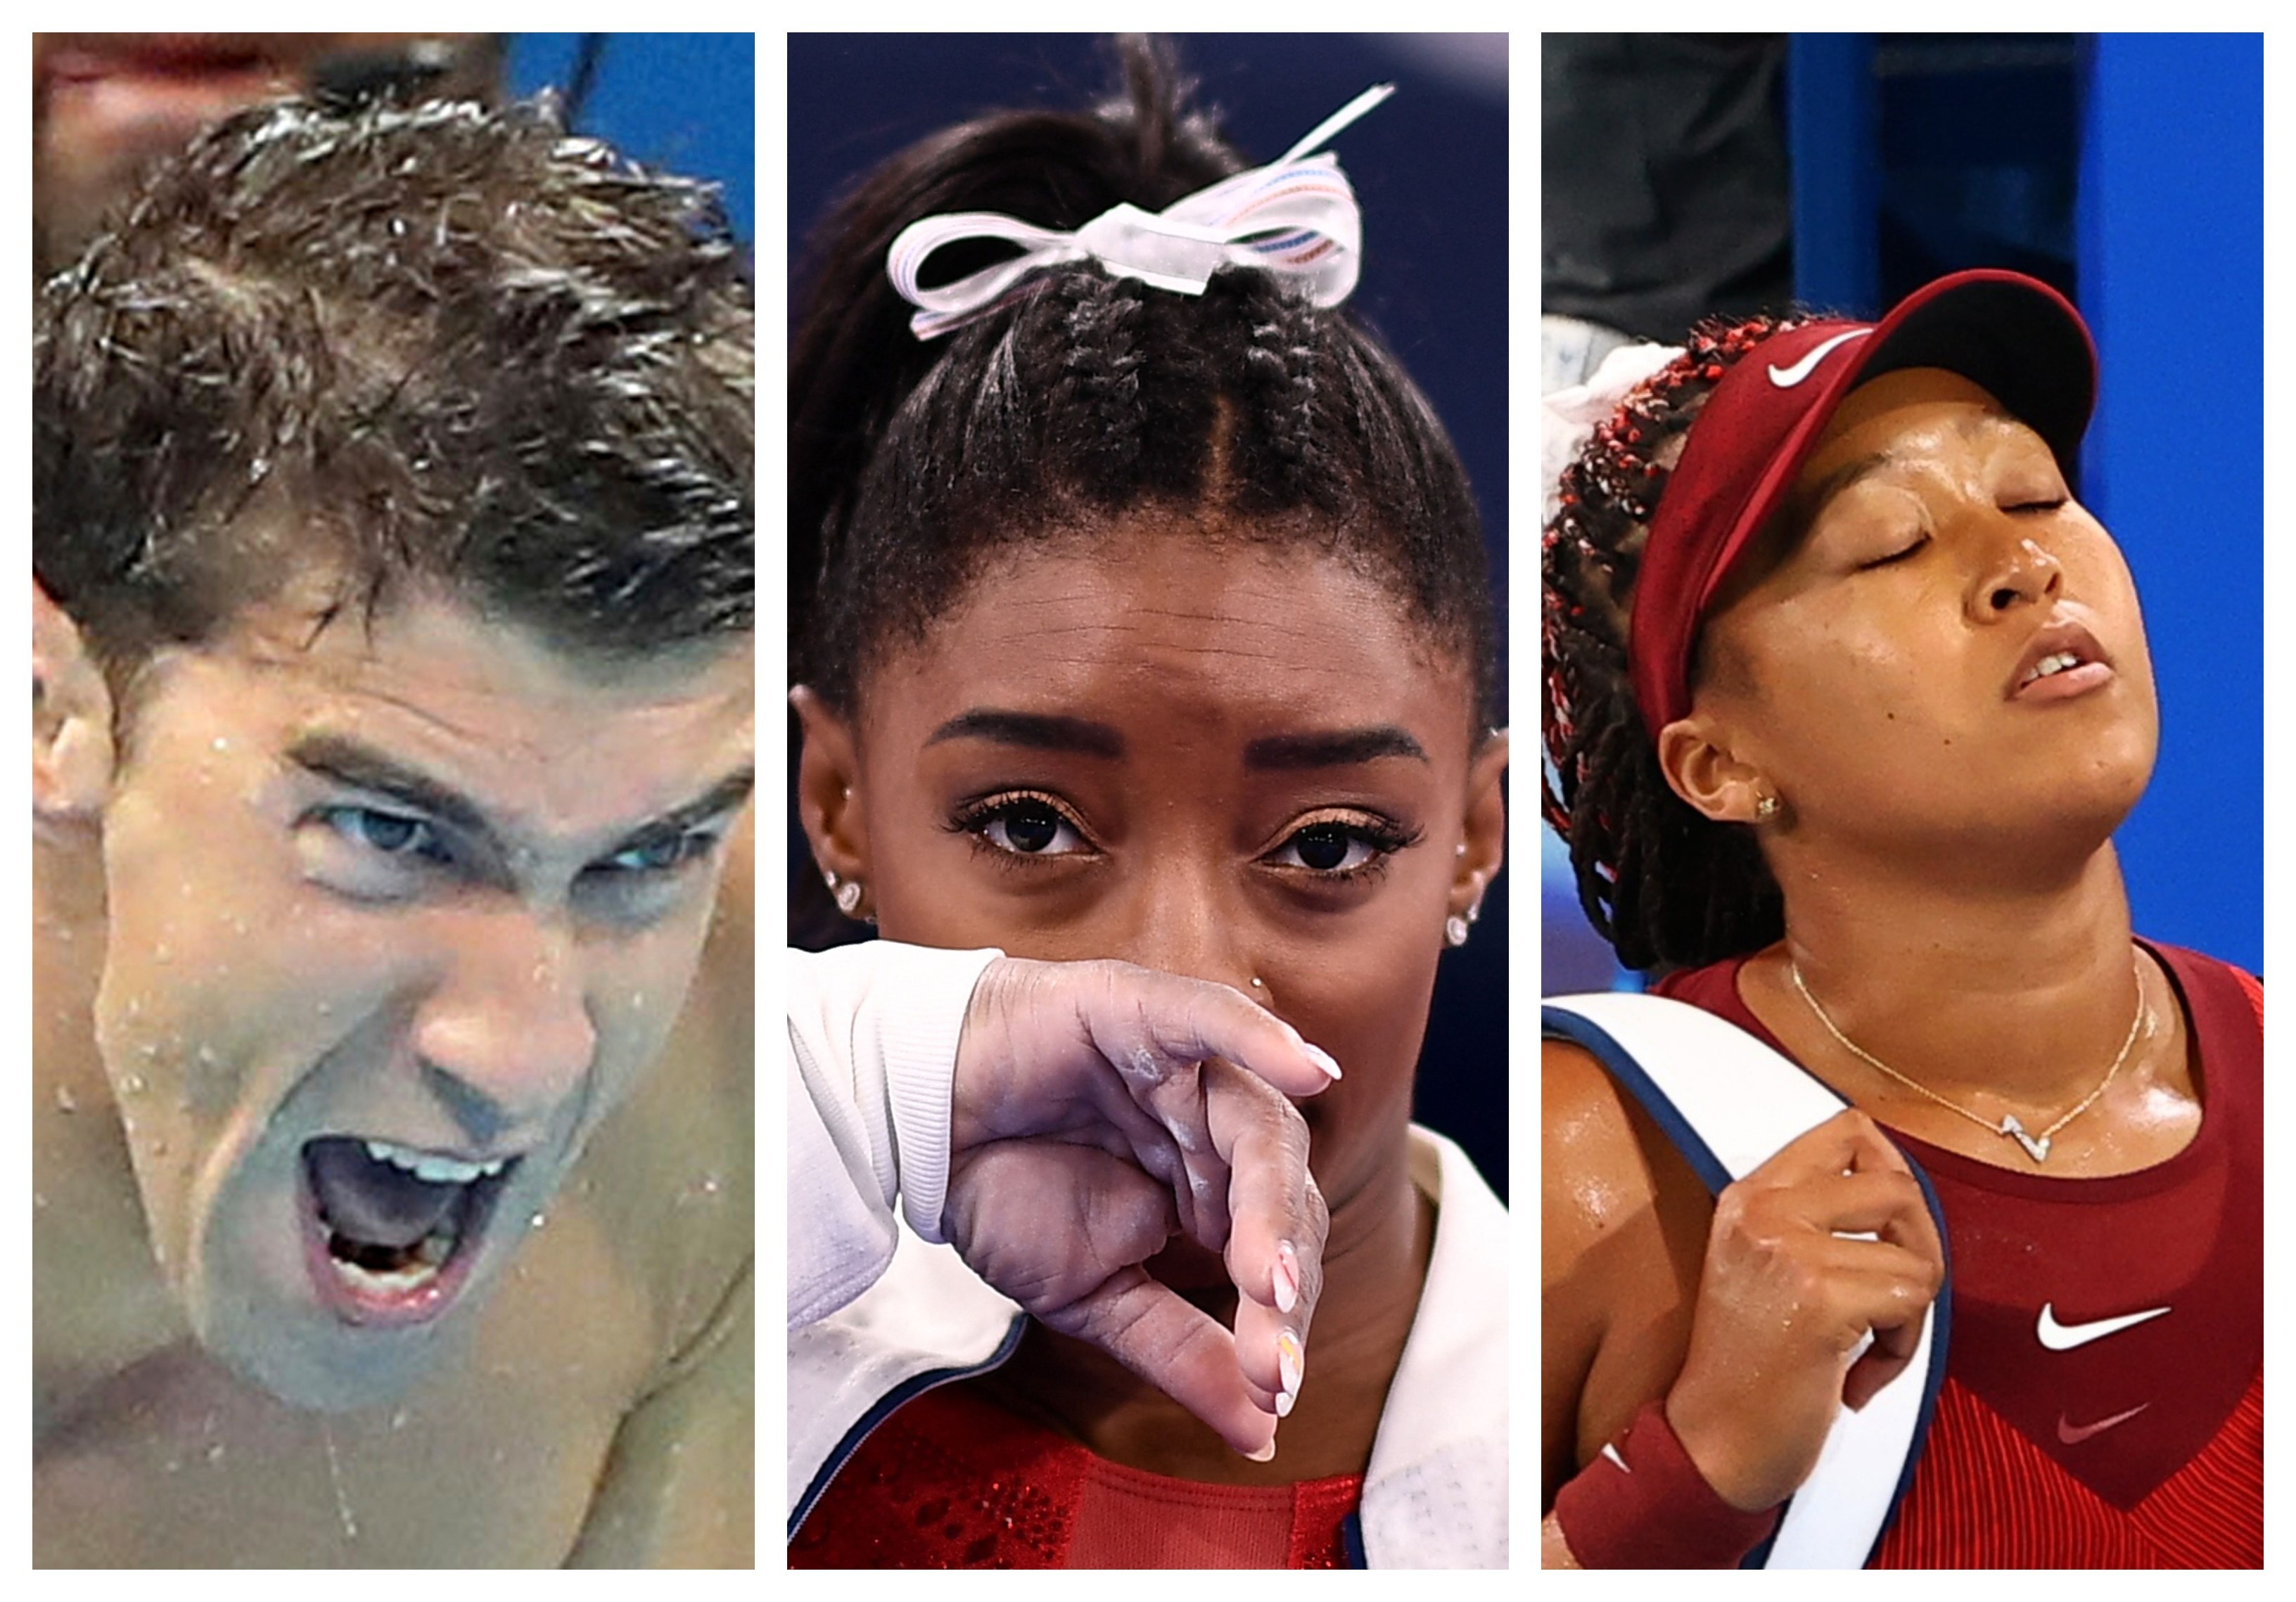 Star athletes who have spoken out about their mental health struggles include Michael Phelps, Simone Biles and Naomi Osaka. Photos: AP, AFP, Reuters